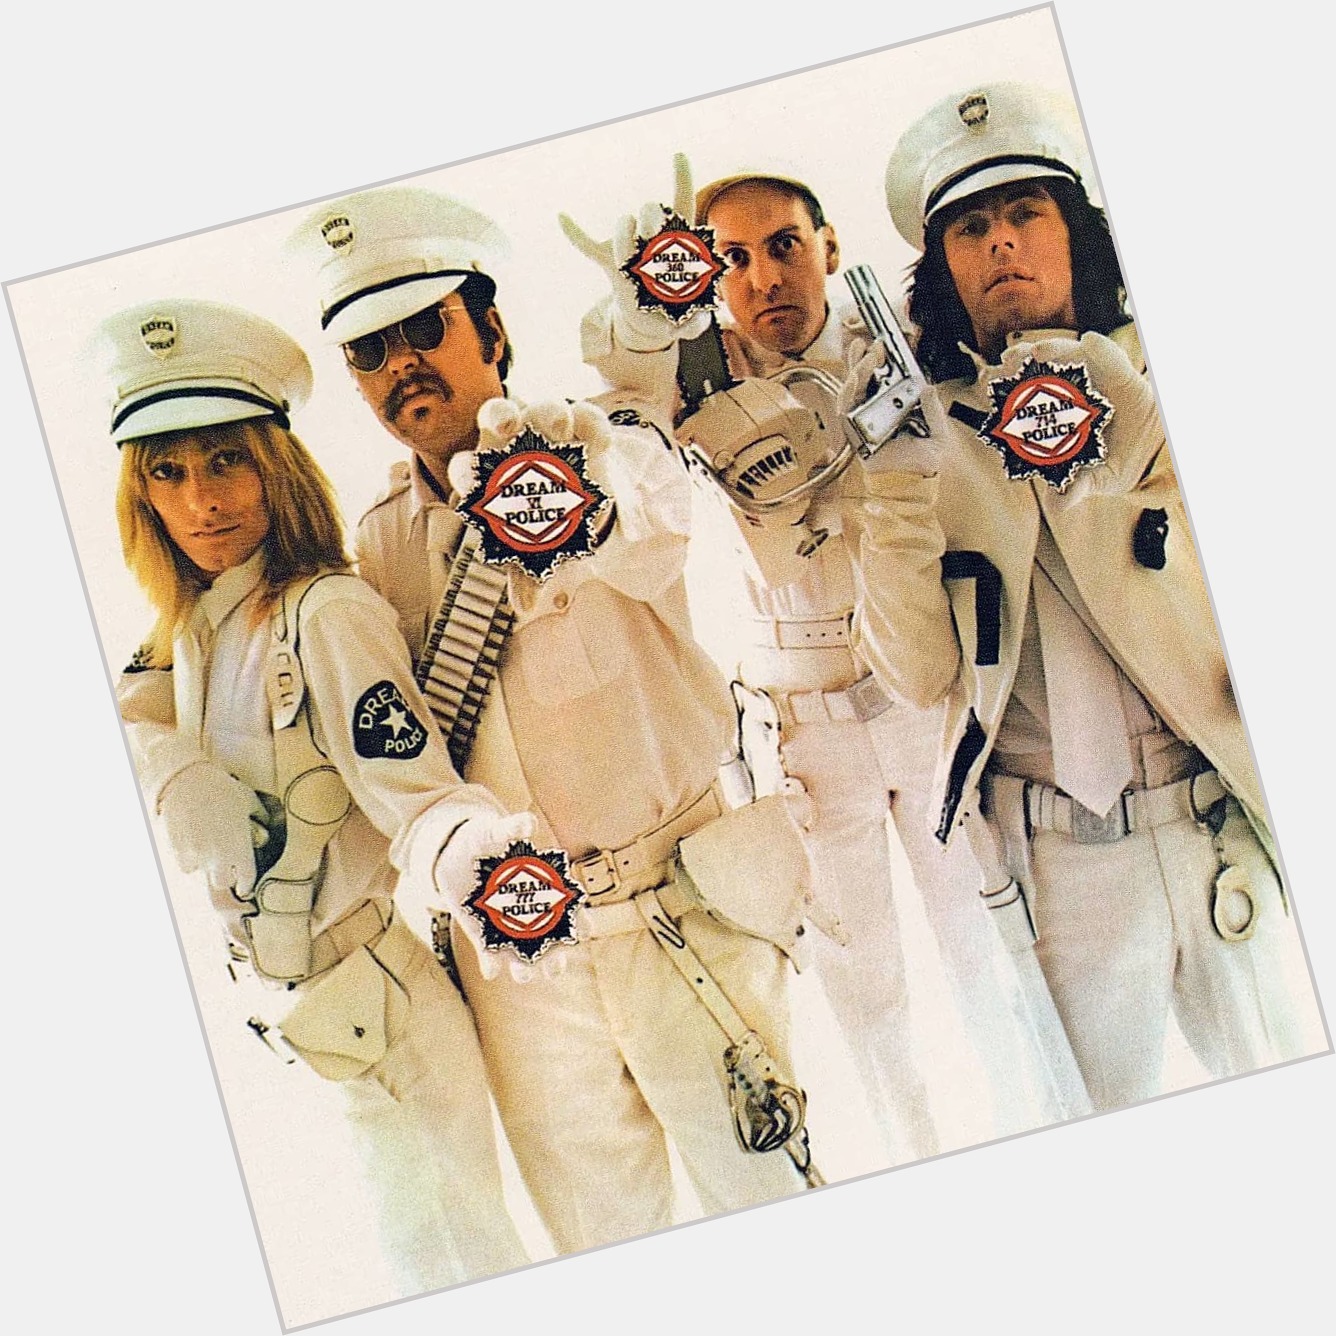 Happy 68th birthday to Robin Zander of Cheap Trick! One of the great voices of rock history. 